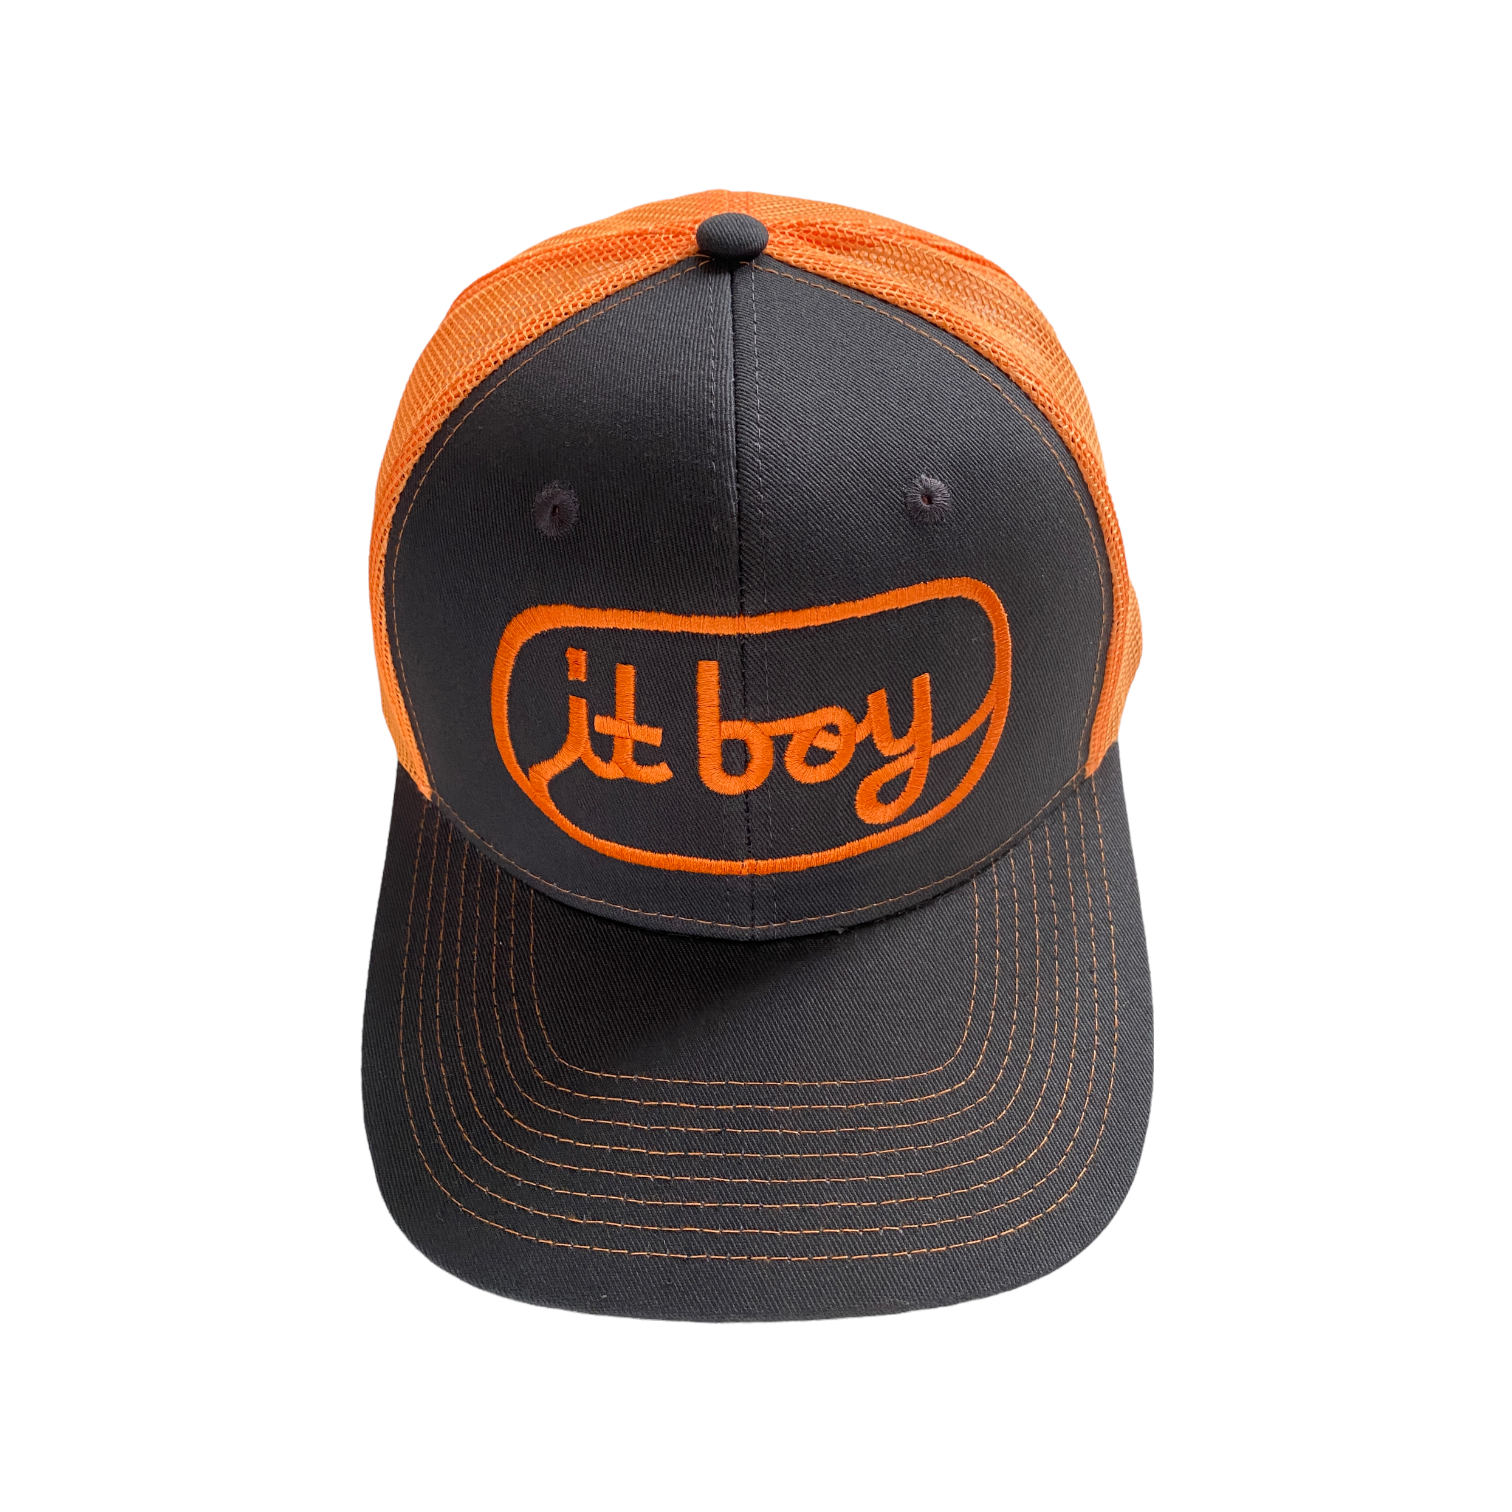 front of neon orange and stone gray trucker hat with orange embroidery reading it boy in cursive